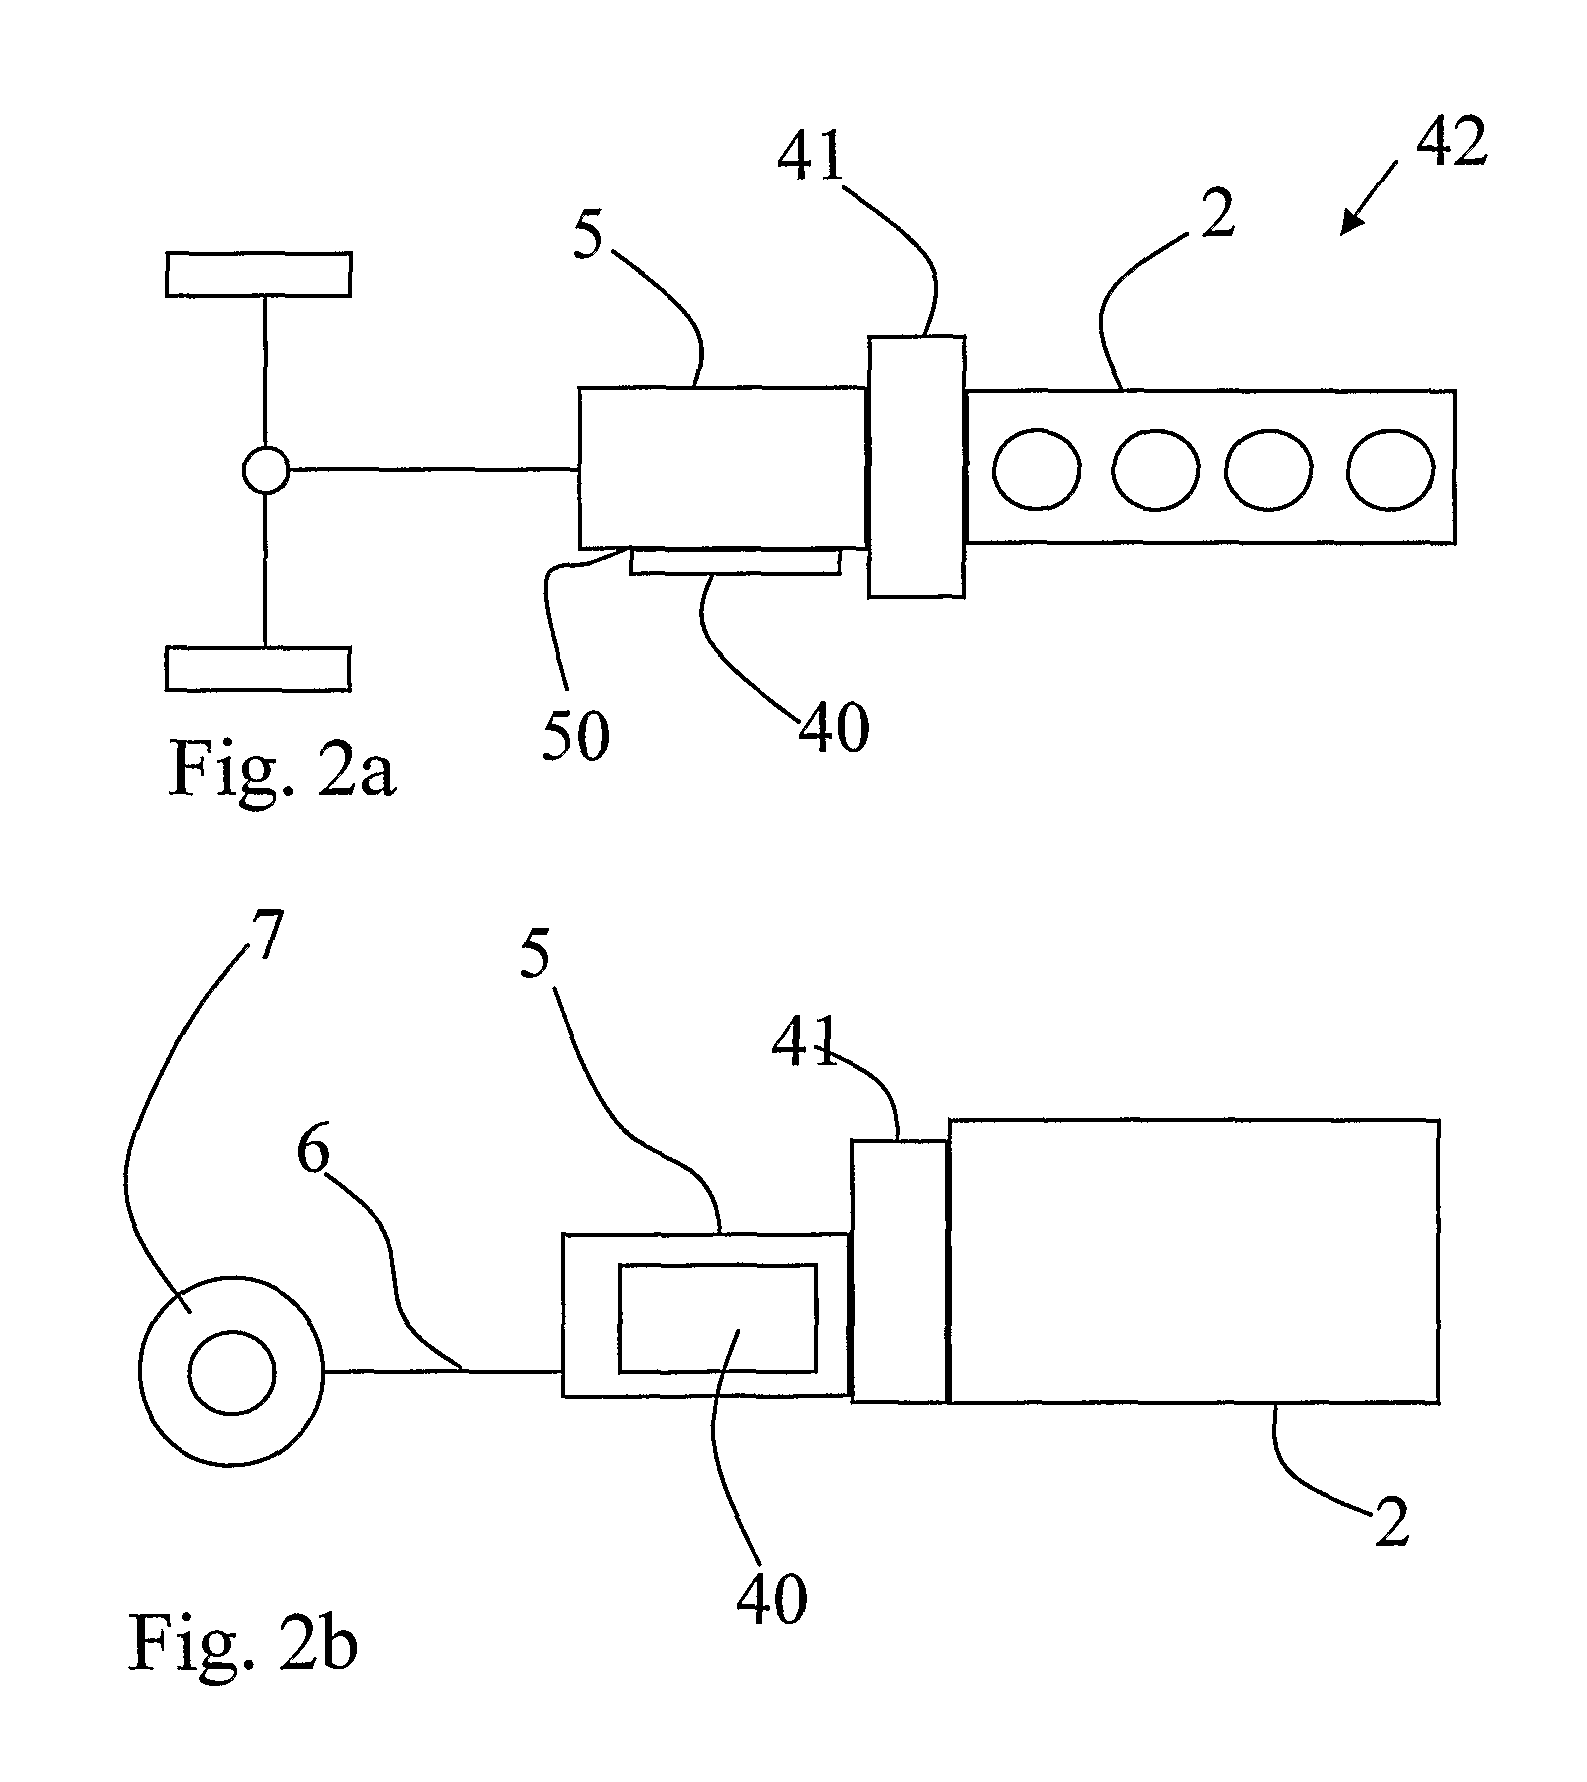 Arrangement for a power electronics unit in a hybrid vehicle